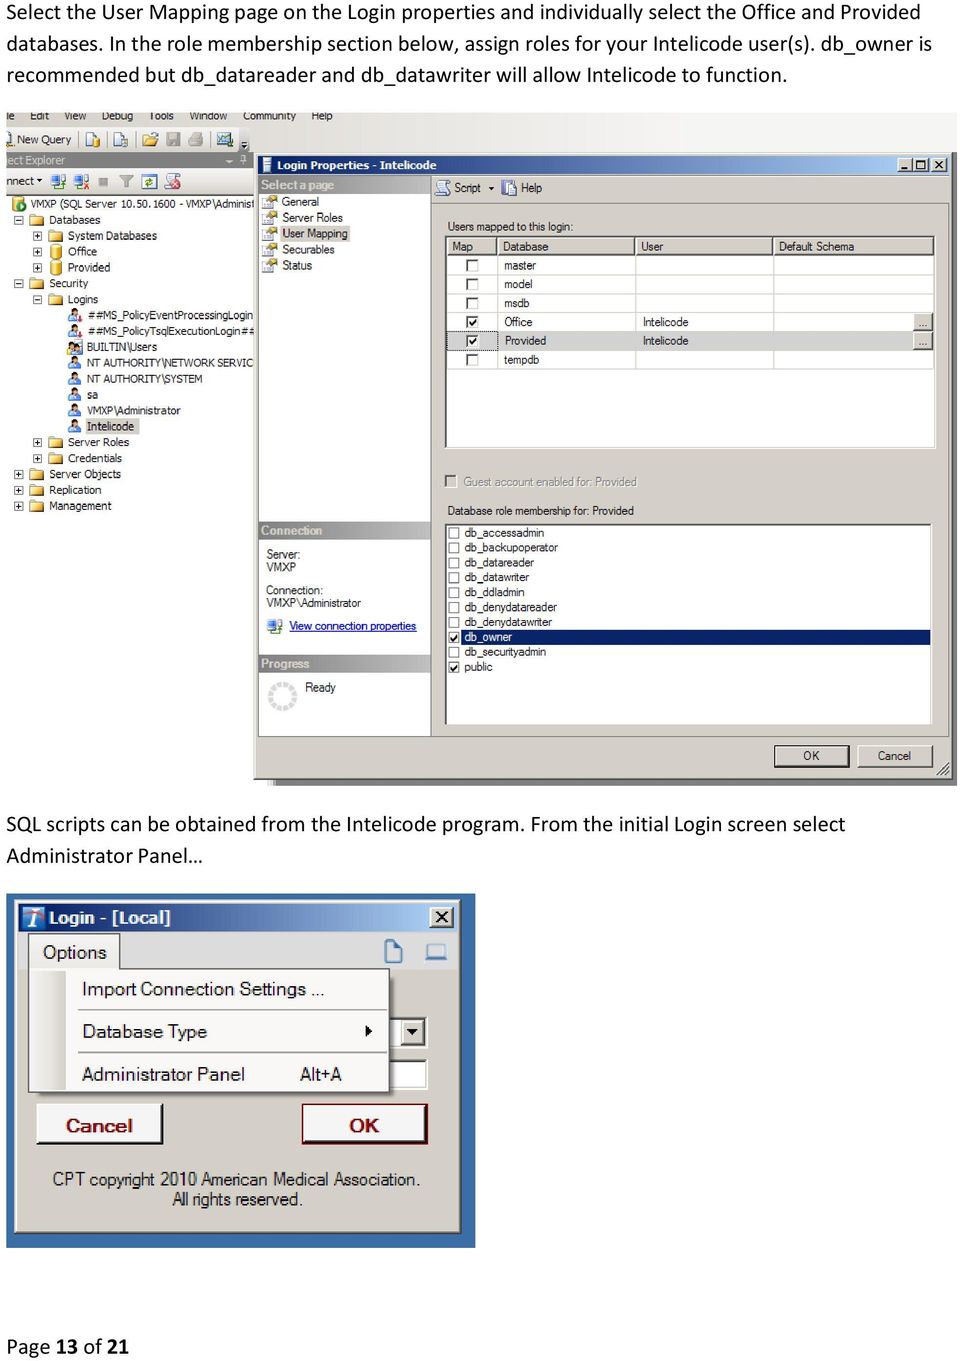 db_owner is recommended but db_datareader and db_datawriter will allow Intelicode to function.